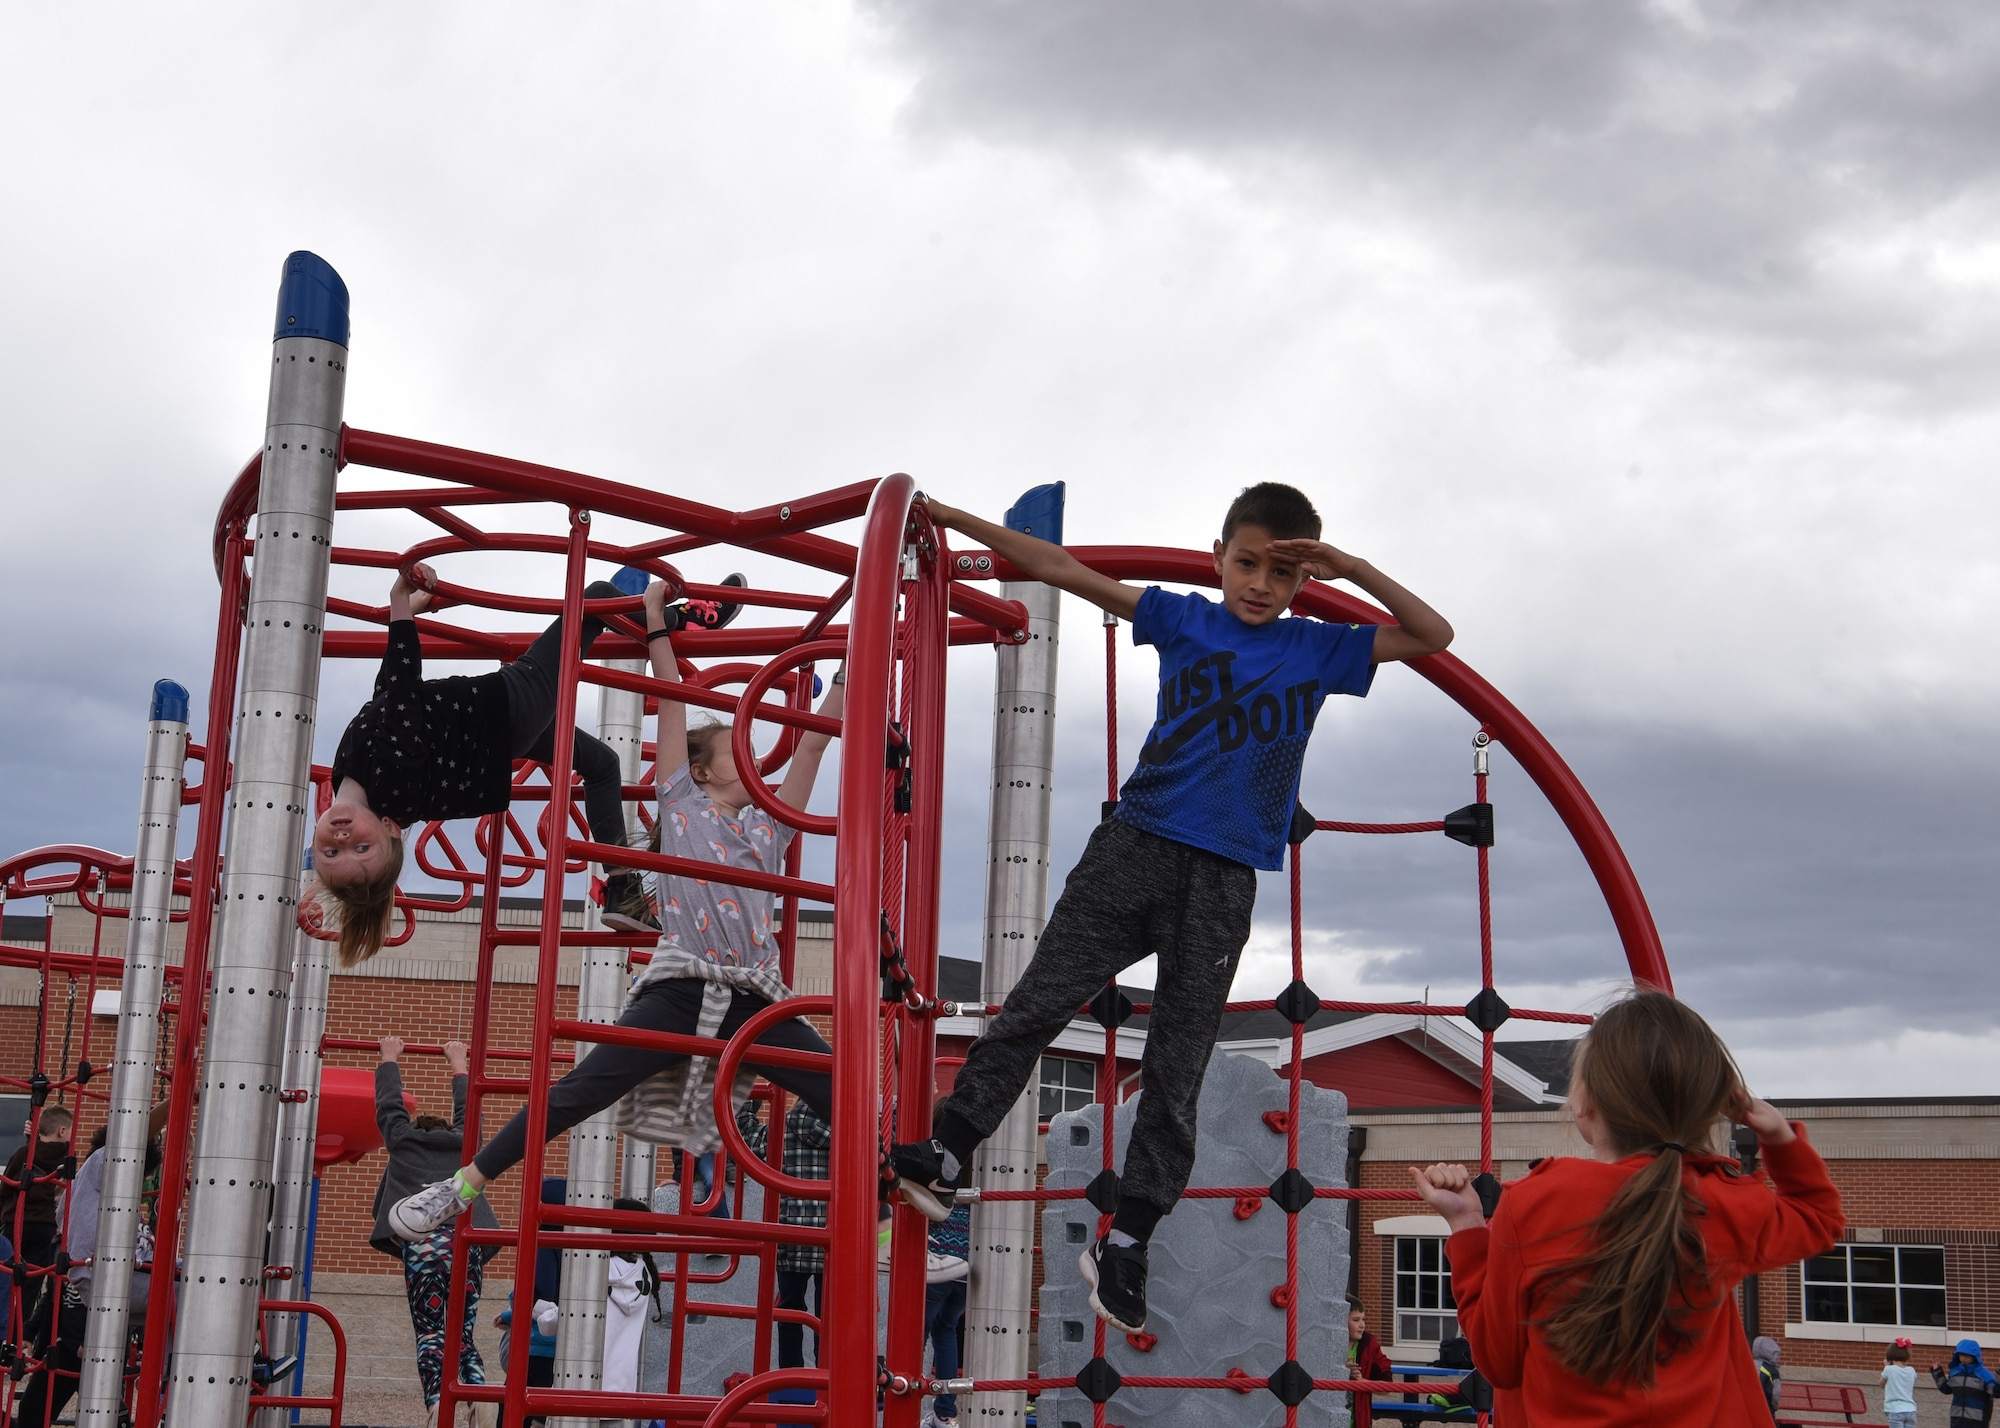 Reagan salutes a classmate from the top of a jungle gym, April 15, 2019, in Cheyenne, Wyo. While his understanding of the military is limited he knows what his mom is doing is important and he is proud that she is in the military. (U.S. Air Force photo by Airman 1st Class Braydon Williams)